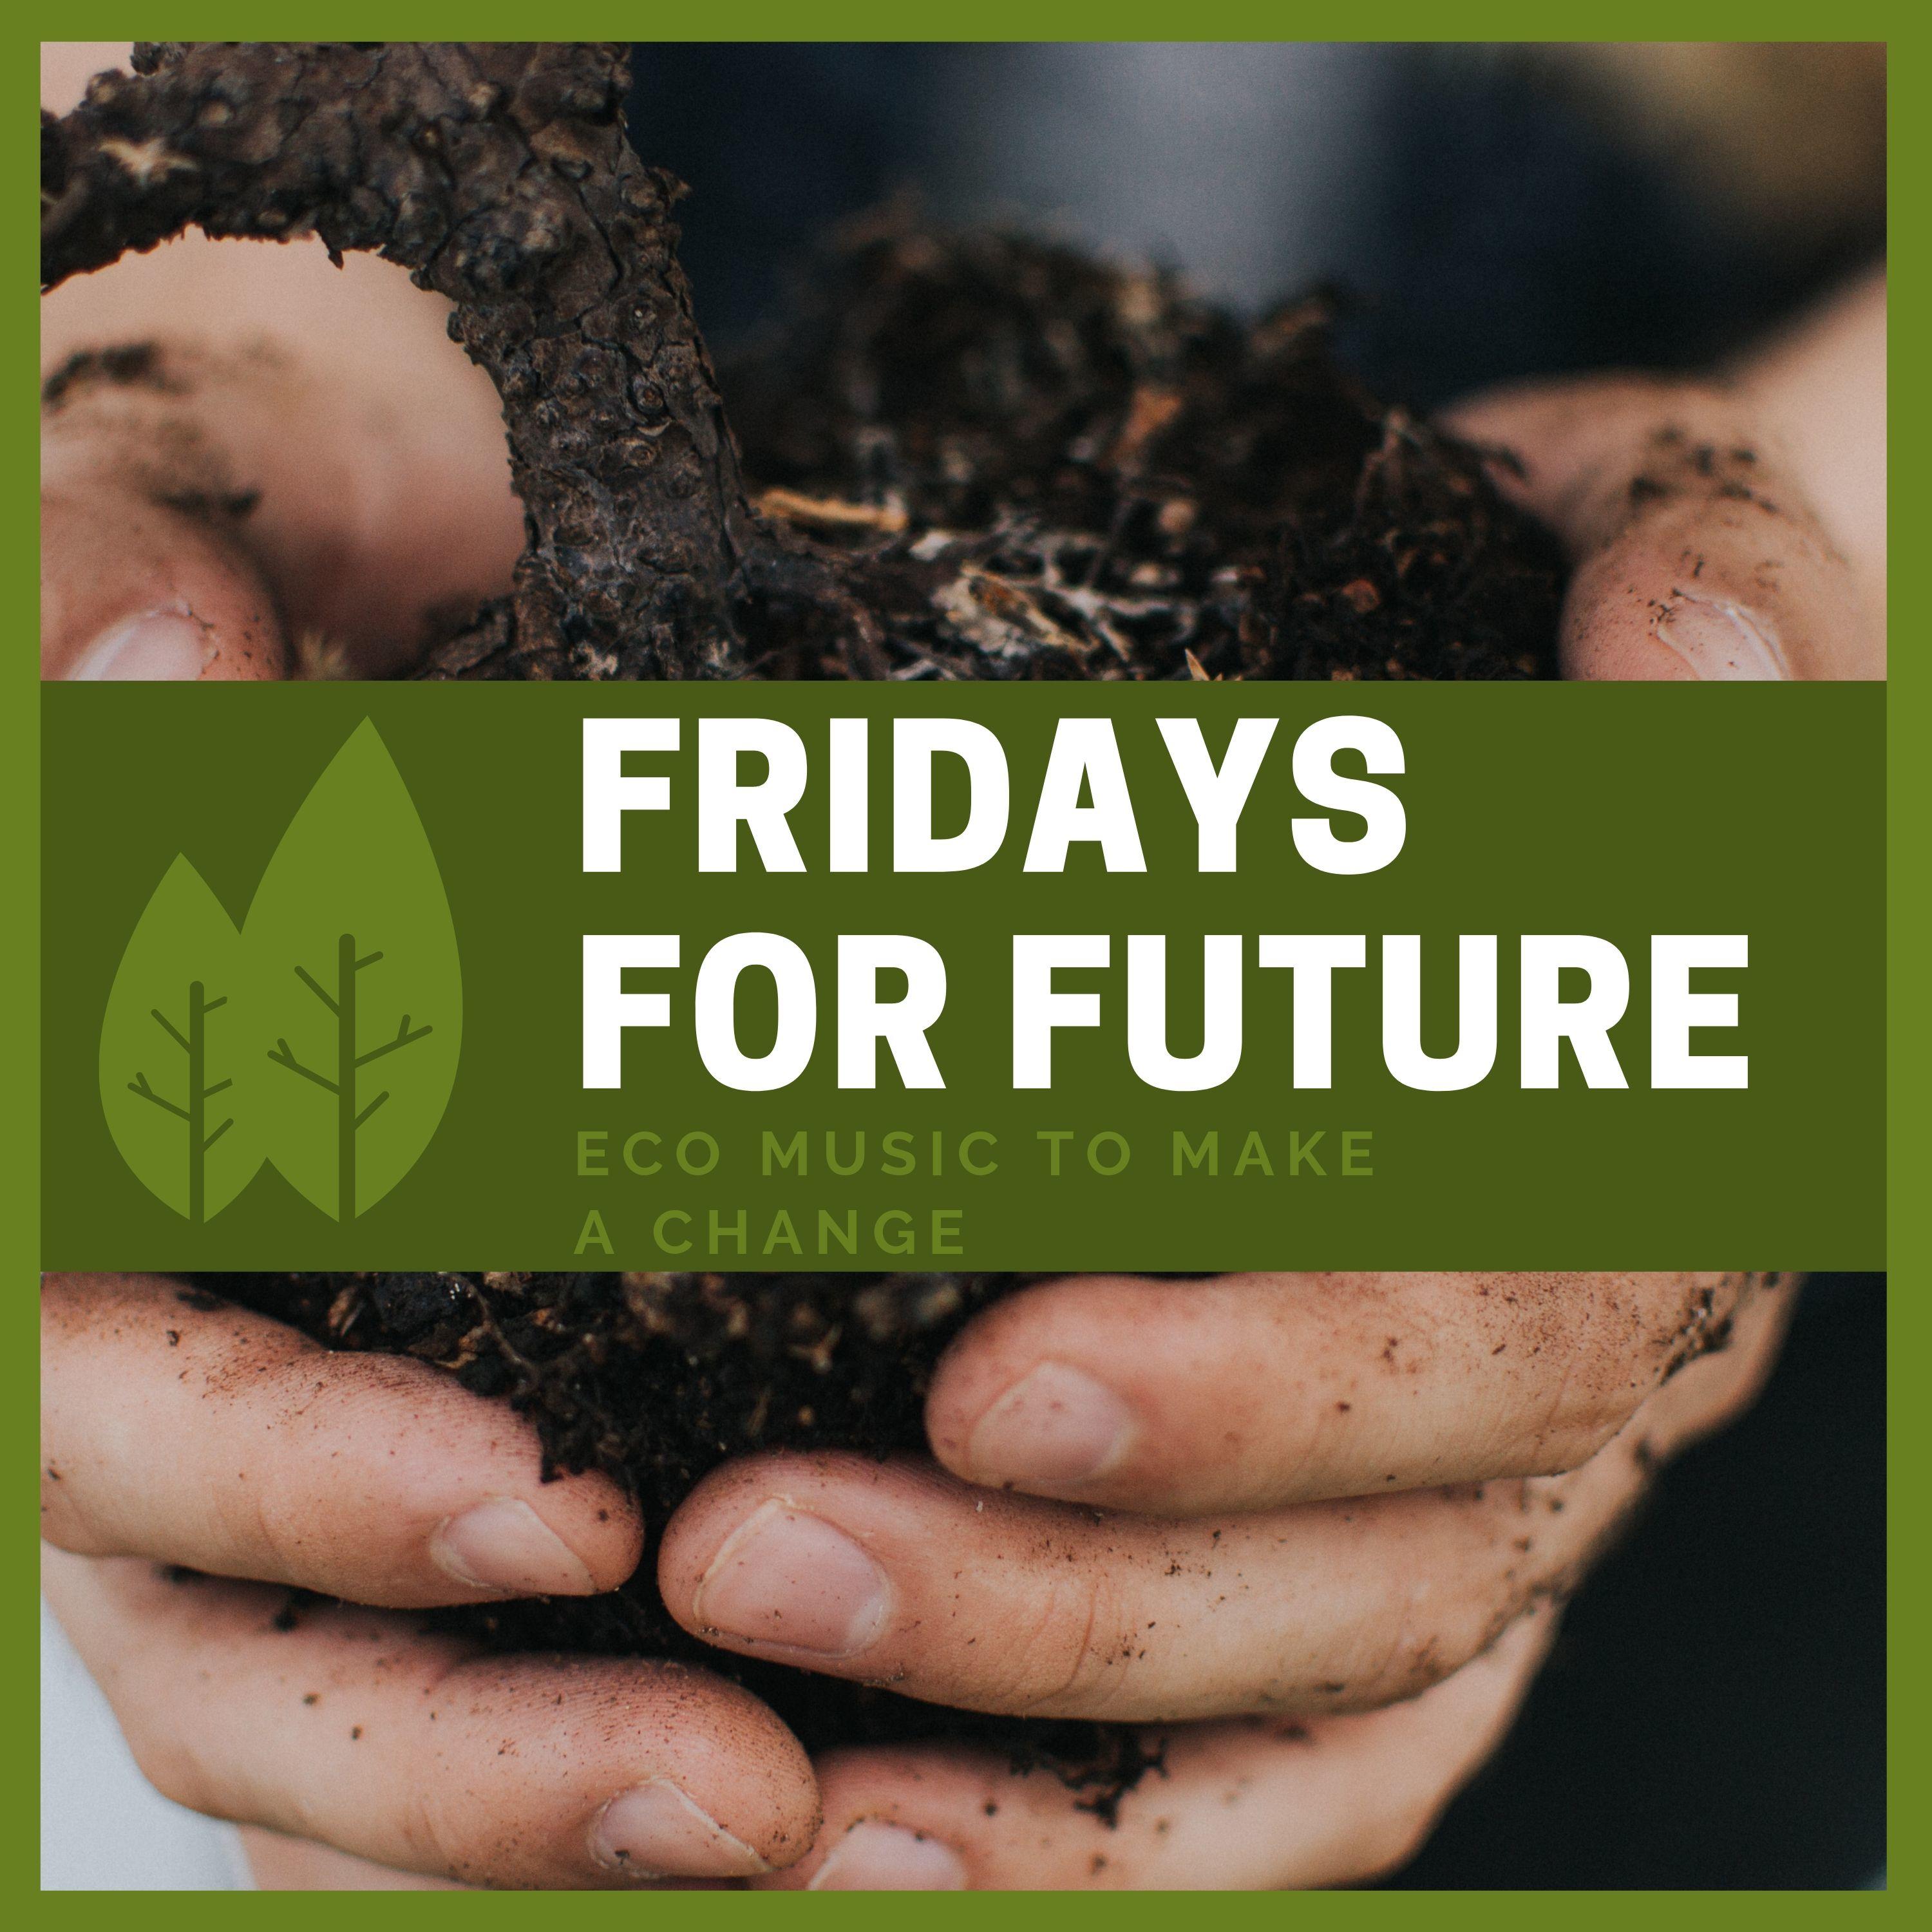 About Fridays for Future